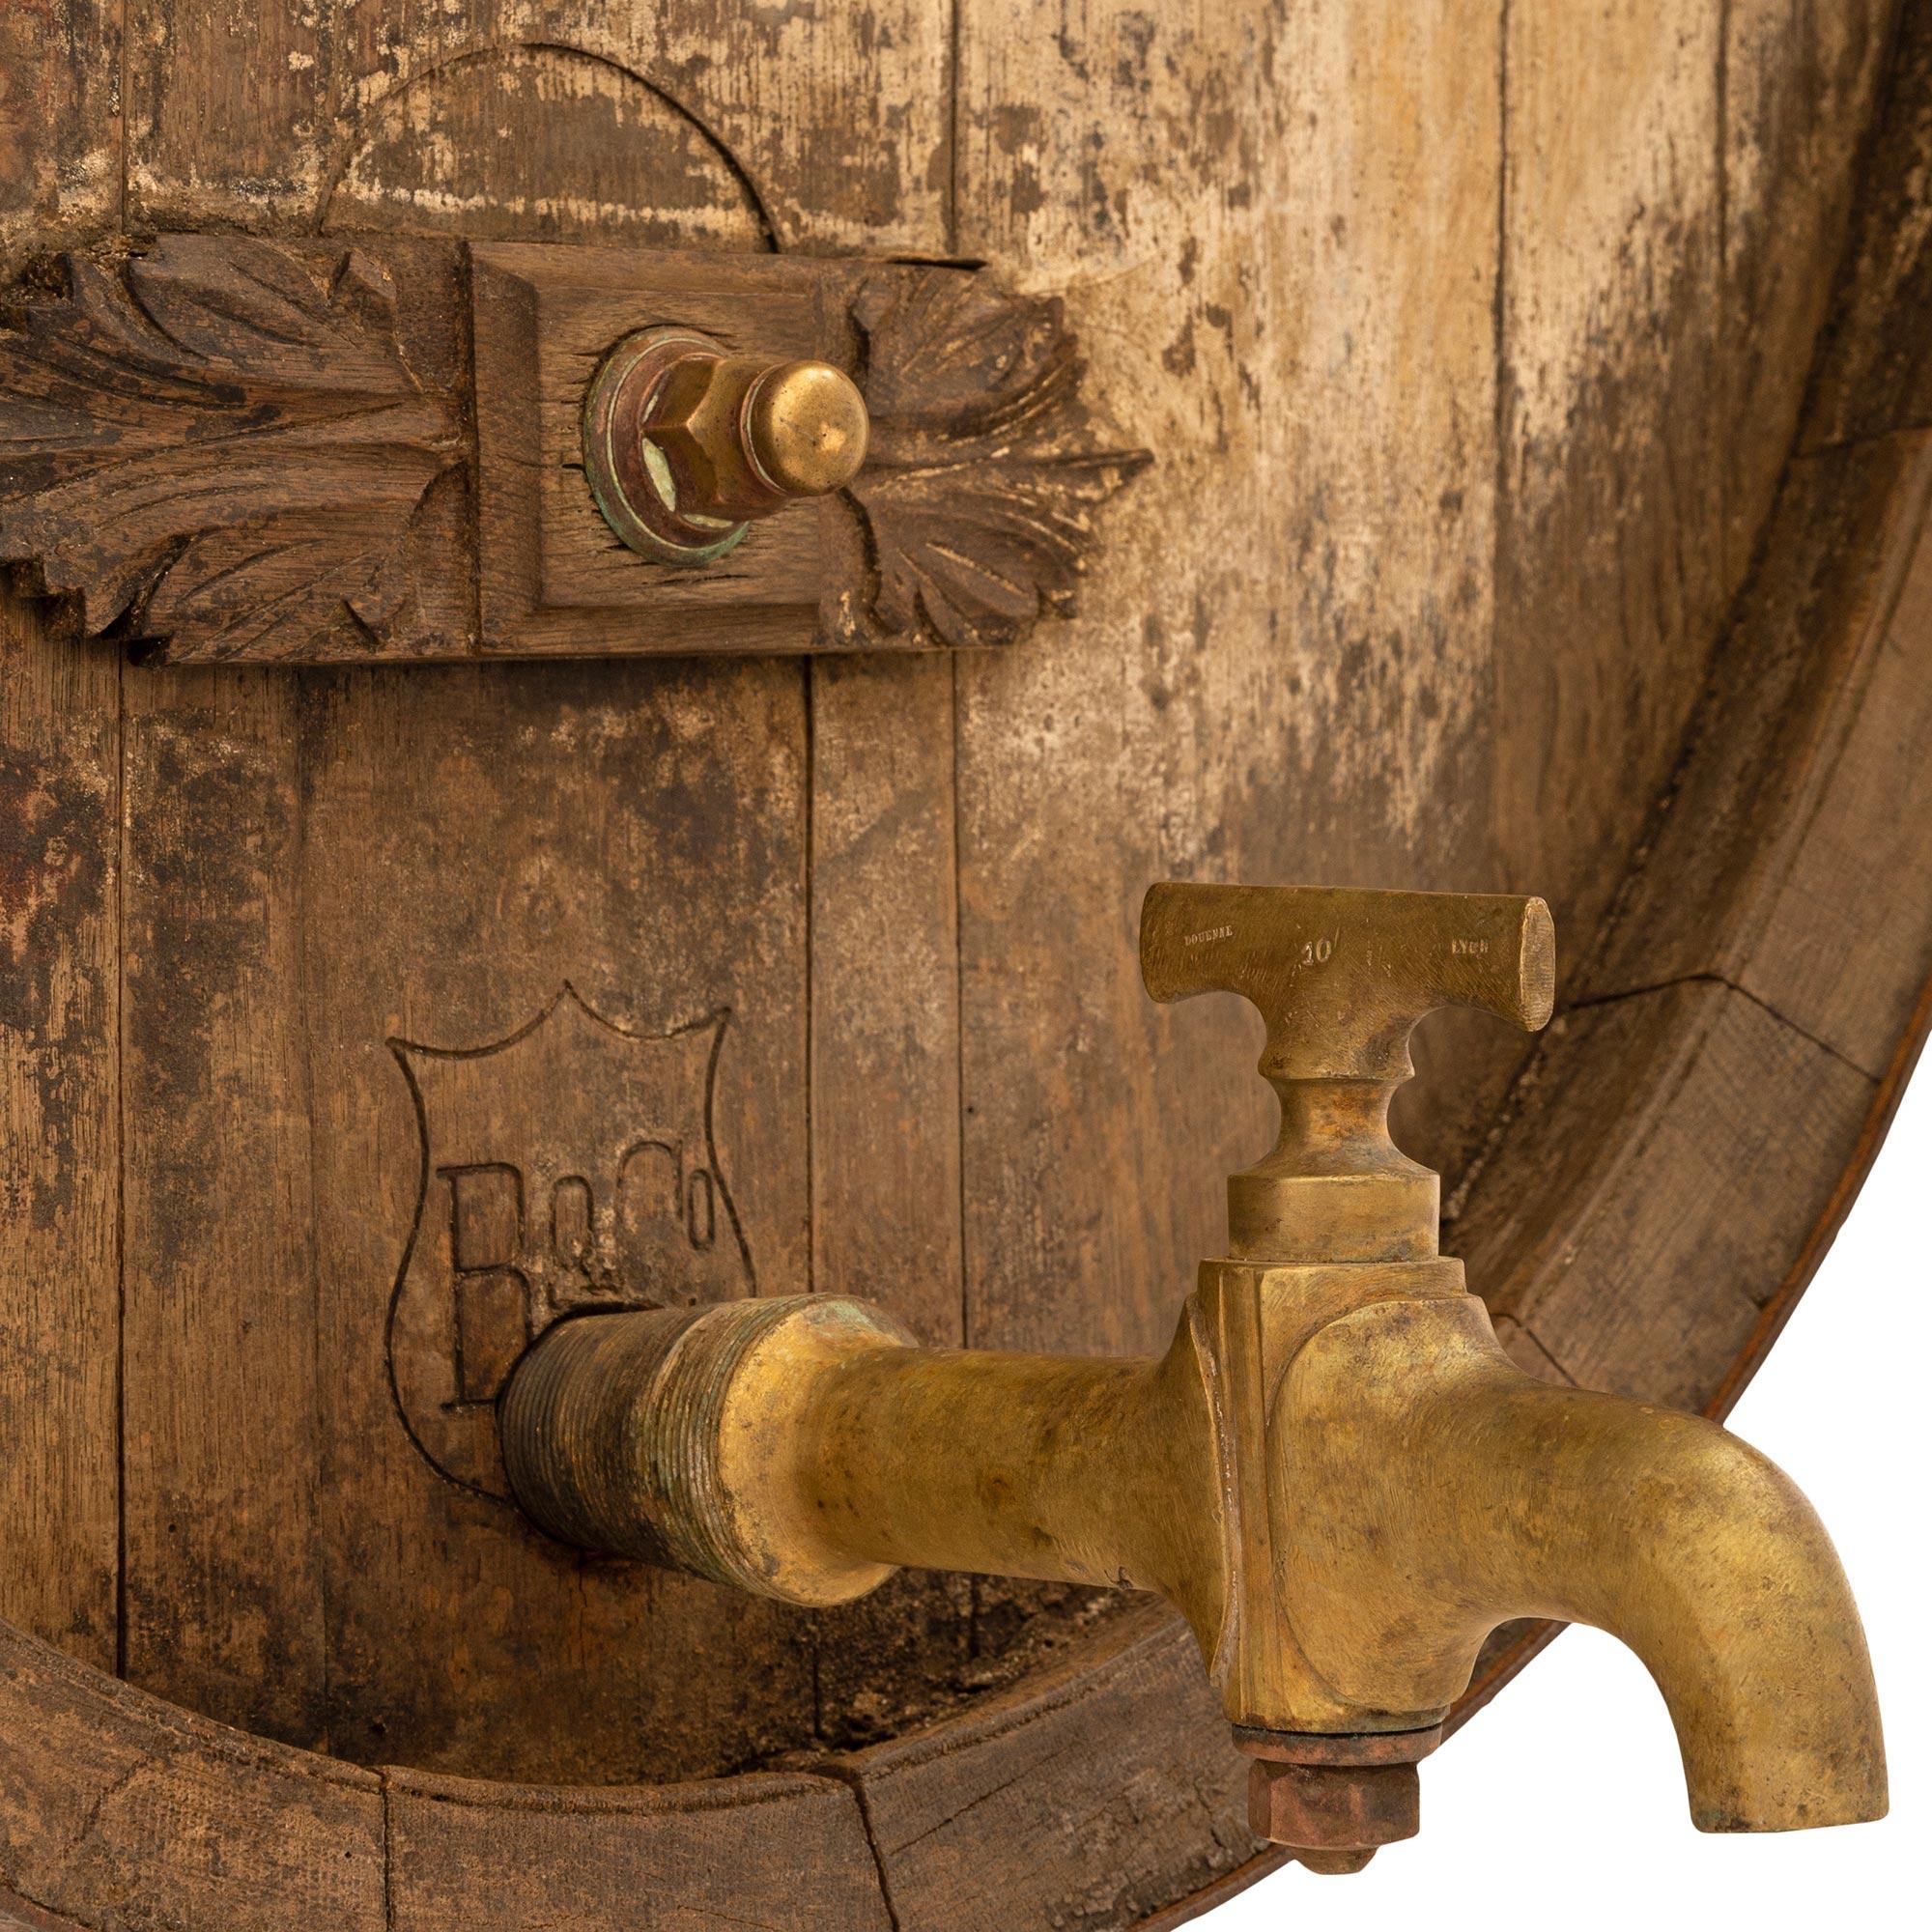 A very unique and authentic French 19th century Cognac/wine Oak barrel wall decor. This handsome barrel transformed into a wonderful wall decor has all of its original markings, identification tags, copper bands, brass faucet, and mounting brackets.